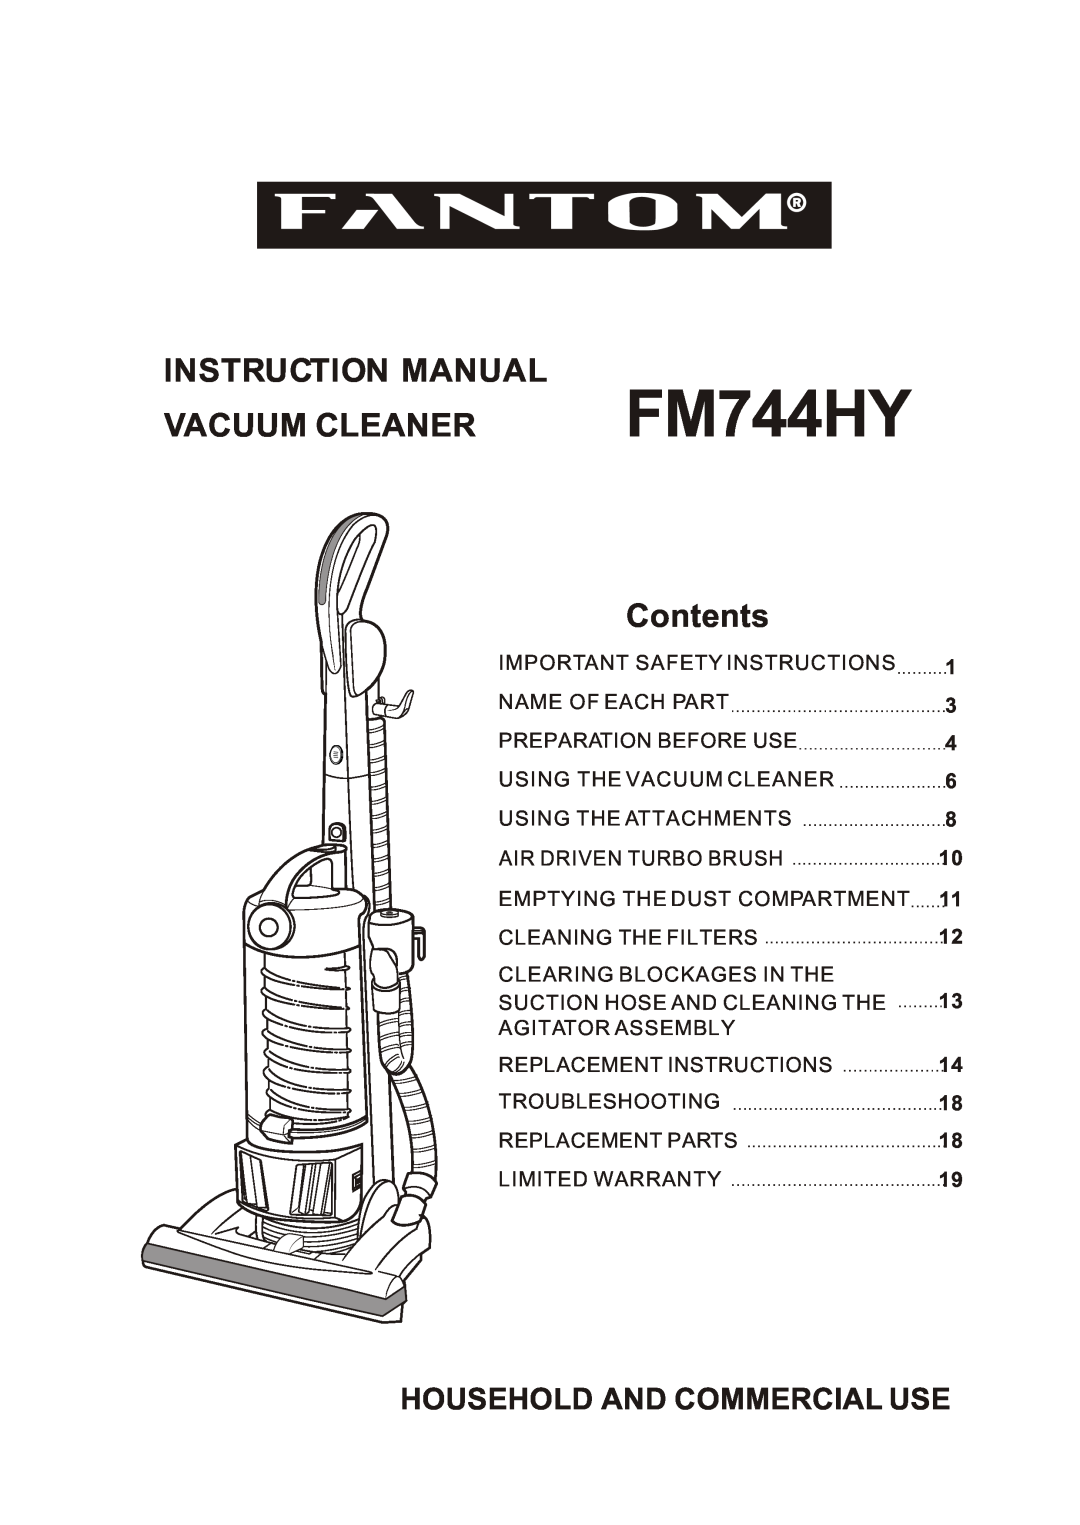 Fantom Vacuum FM744HY instruction manual Vacuum Cleaner, Contents, Household And Commercial Use, 1 3 4 6 8 10 11 12 